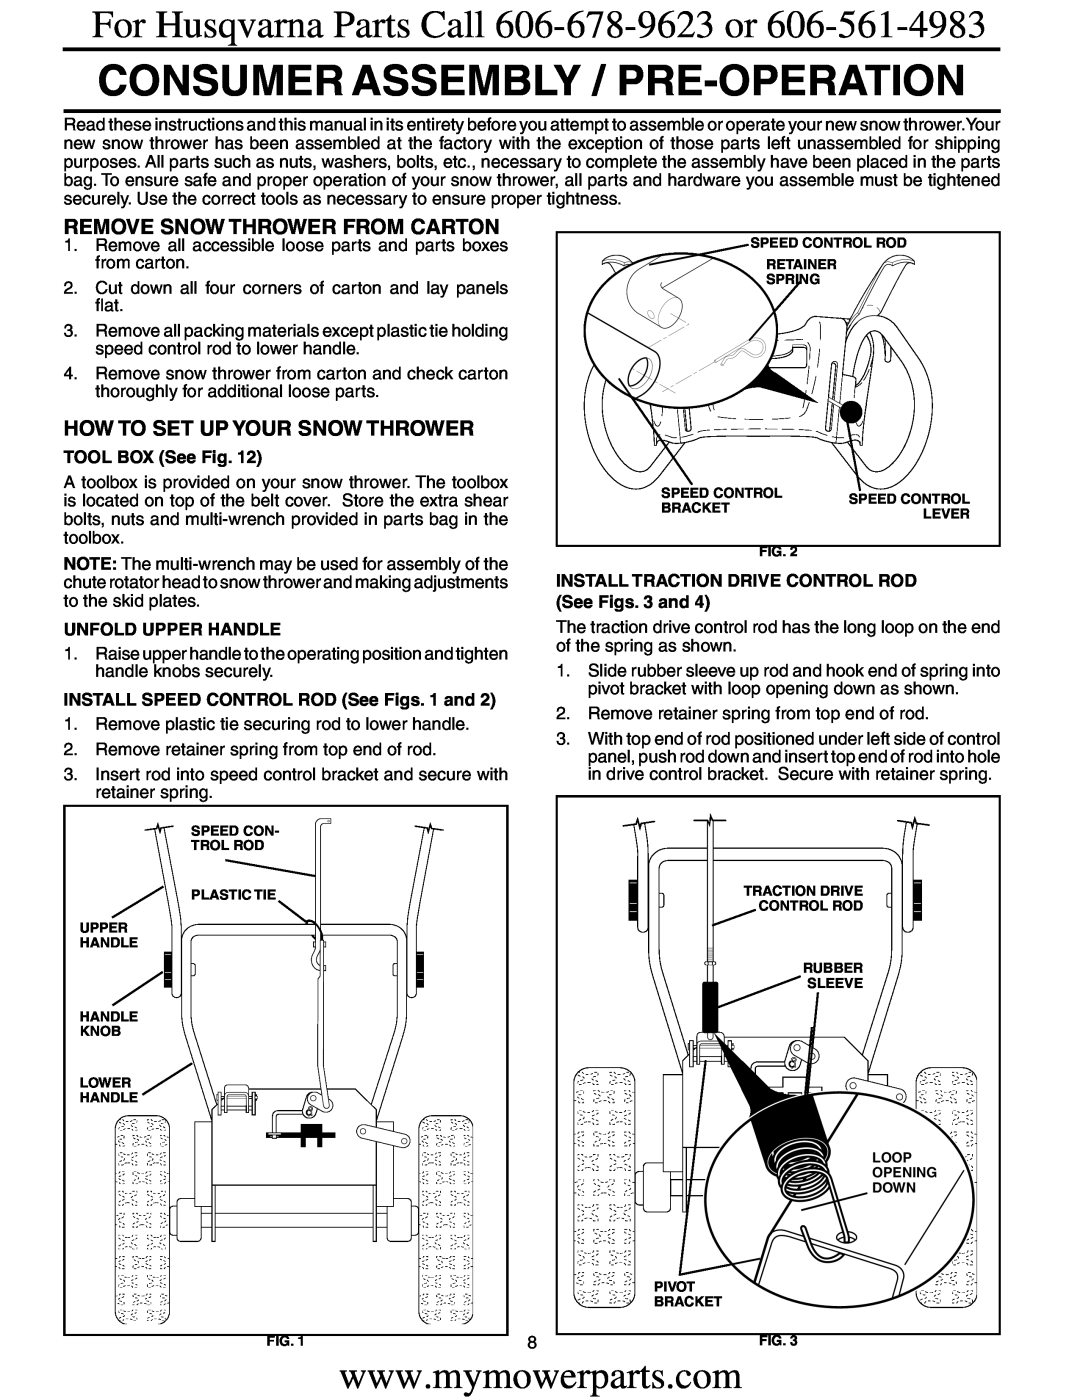 Electrolux OHV service manual Consumer Assembly / Pre-Operation, For Husqvarna Parts Call 606-678-9623 or, TOOL BOX See Fig 